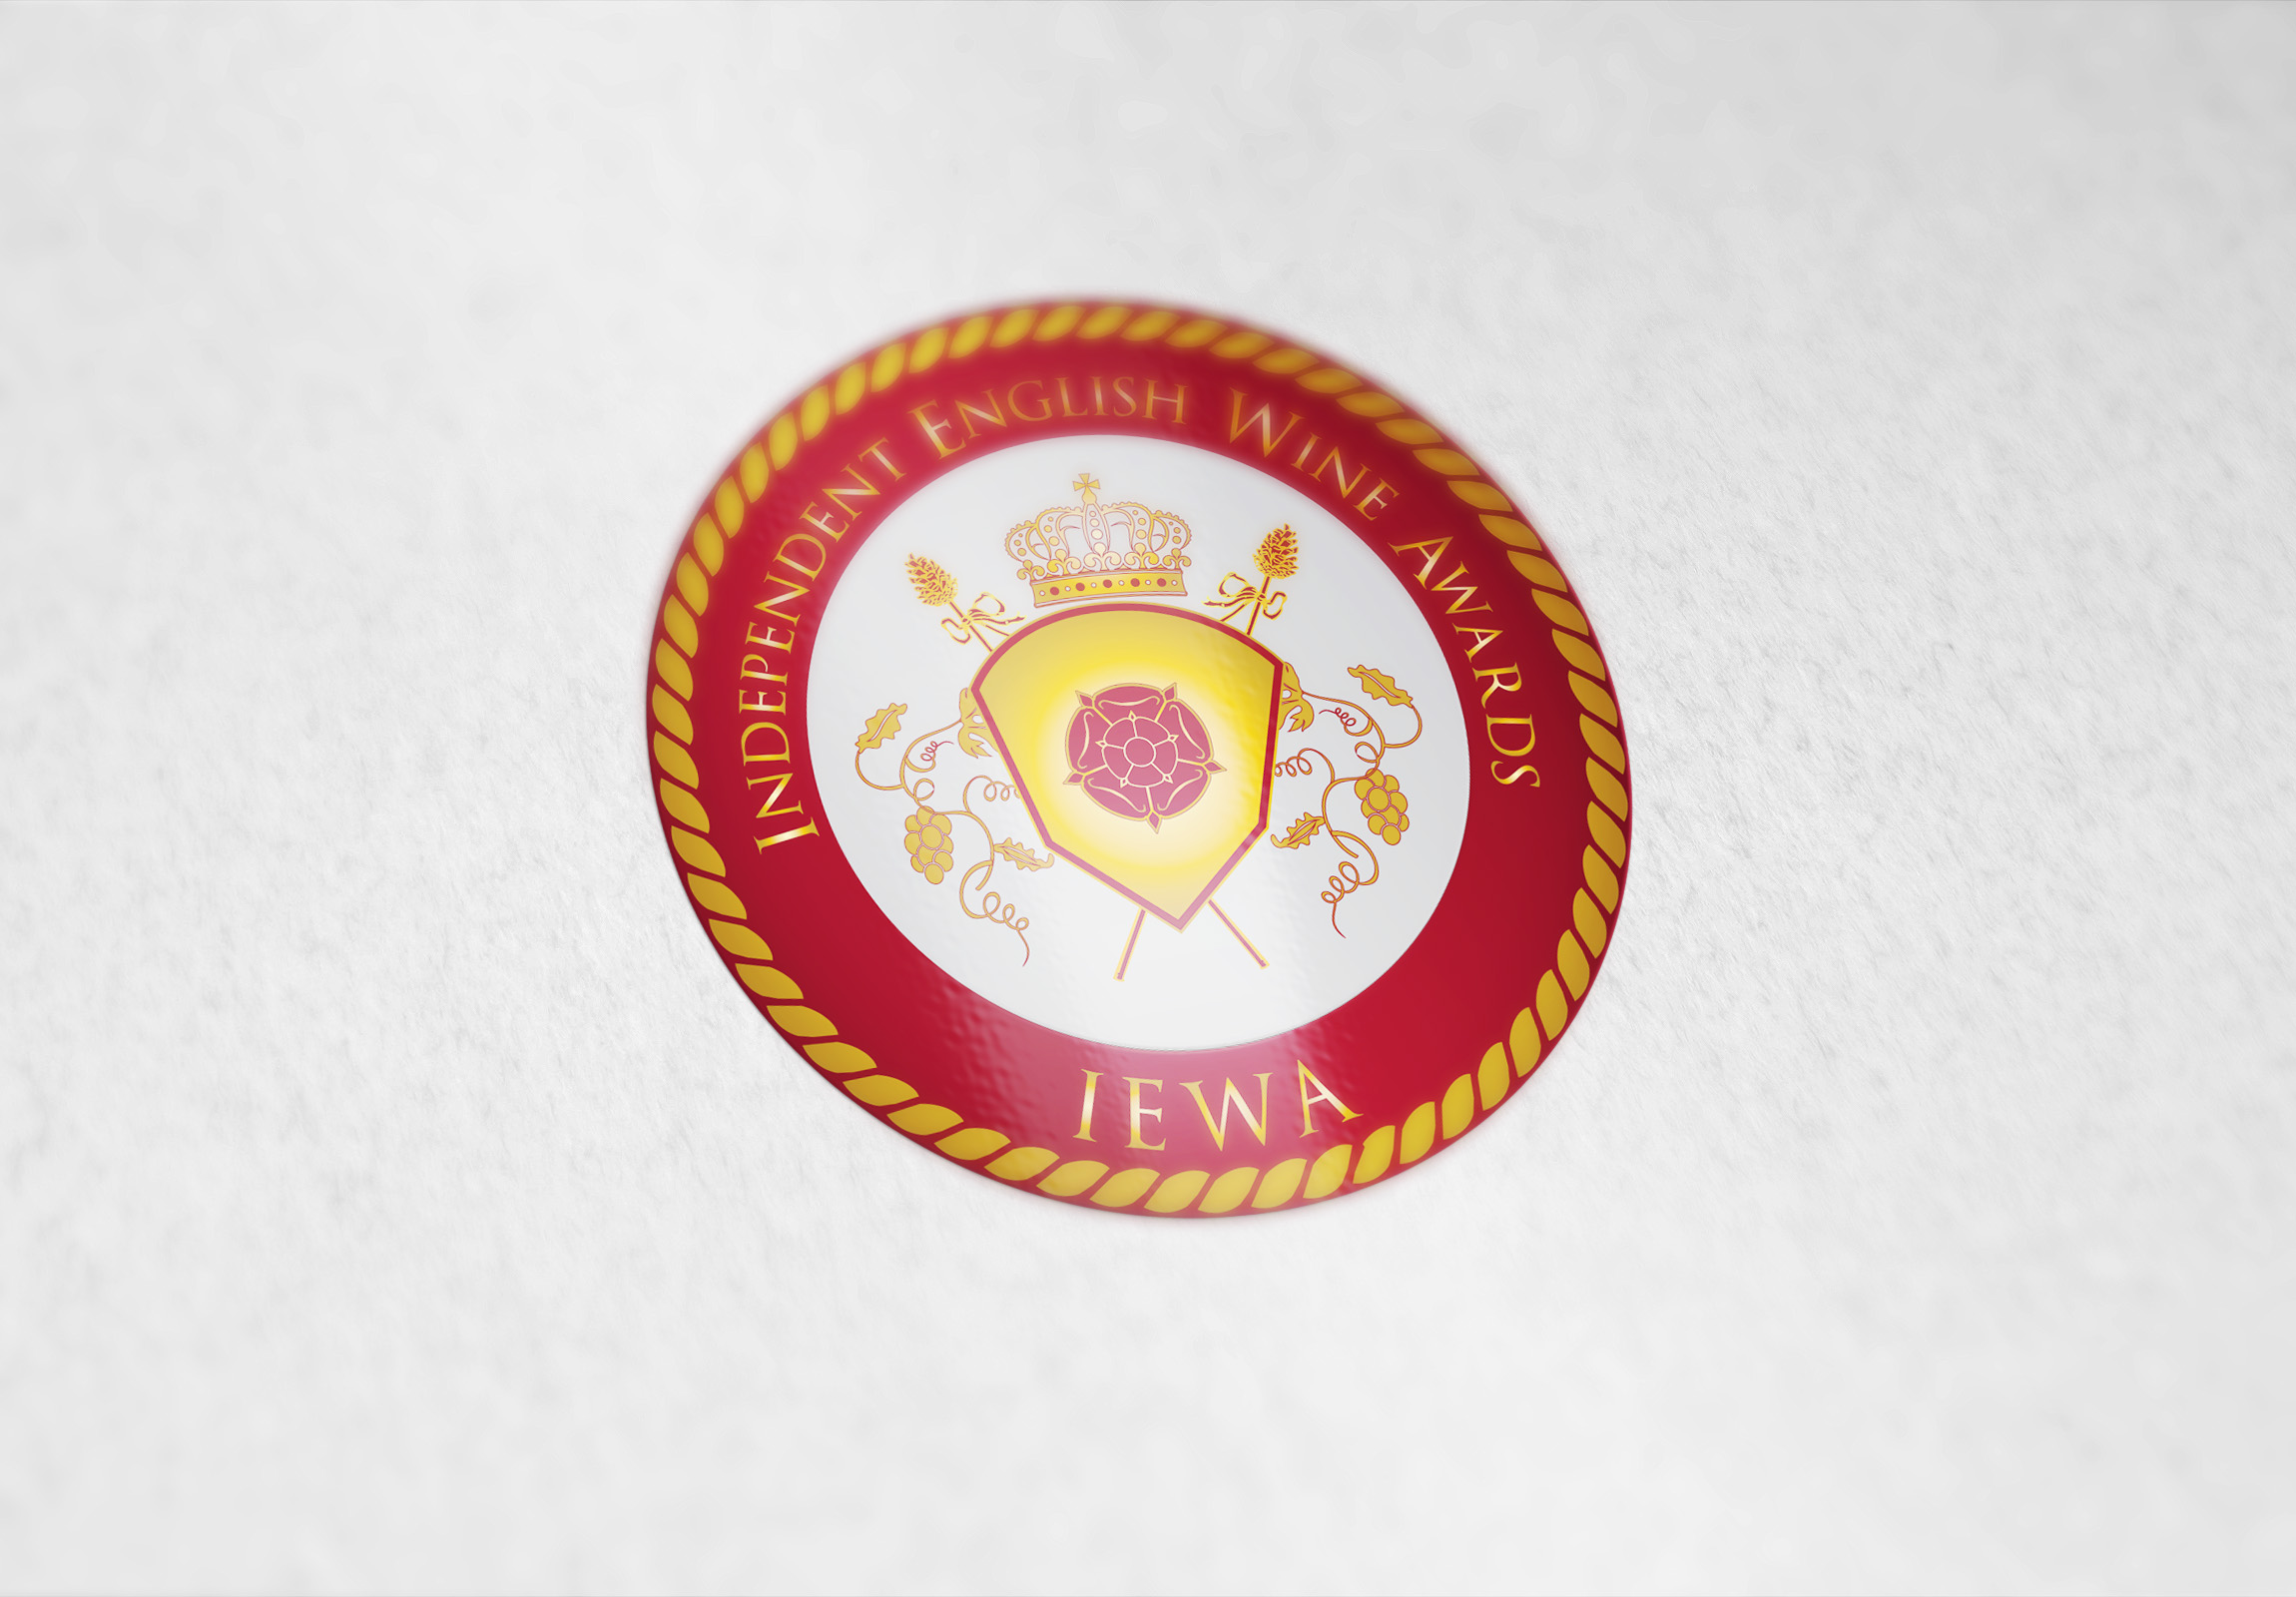 Coat of arms designed for the Independent English Wine Awards.